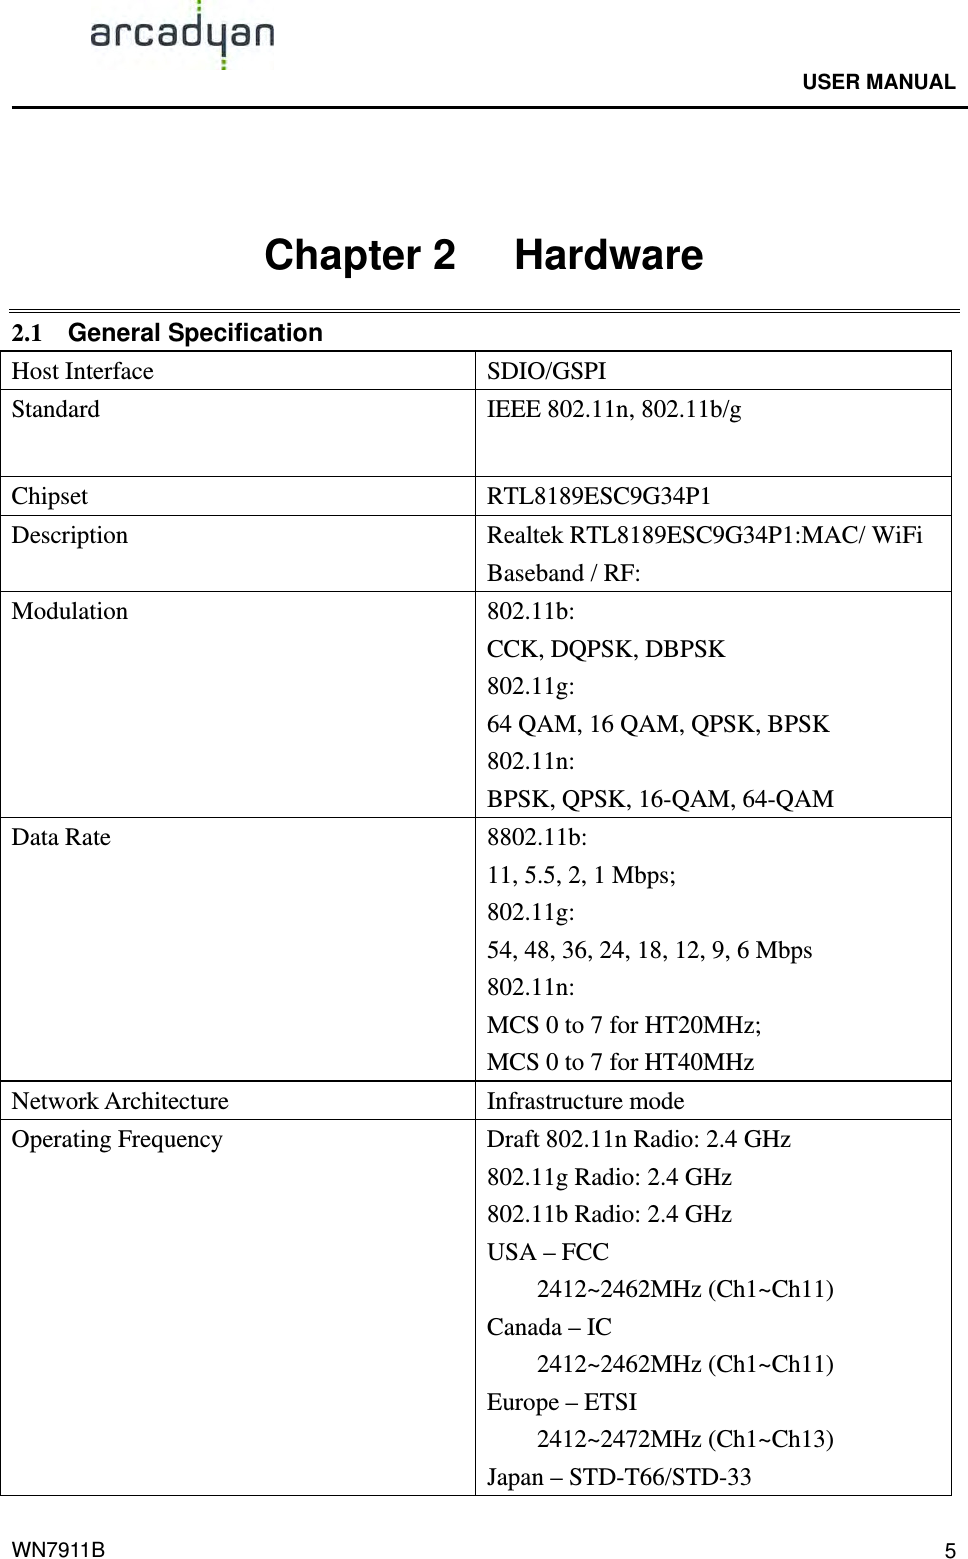                                              USER MANUAL                                              WN7911B  5 Chapter 2   Hardware 2.1  General Specification Host Interface  SDIO/GSPI Standard  IEEE 802.11n, 802.11b/g  Chipset RTL8189ESC9G34P1 Description Realtek RTL8189ESC9G34P1:MAC/ WiFi Baseband / RF: Modulation   802.11b:  CCK, DQPSK, DBPSK 802.11g:  64 QAM, 16 QAM, QPSK, BPSK 802.11n:  BPSK, QPSK, 16-QAM, 64-QAM Data Rate  8802.11b:   11, 5.5, 2, 1 Mbps; 802.11g:  54, 48, 36, 24, 18, 12, 9, 6 Mbps 802.11n:  MCS 0 to 7 for HT20MHz; MCS 0 to 7 for HT40MHz Network Architecture  Infrastructure mode Operating Frequency  Draft 802.11n Radio: 2.4 GHz     802.11g Radio: 2.4 GHz   802.11b Radio: 2.4 GHz USA – FCC           2412~2462MHz (Ch1~Ch11) Canada – IC        2412~2462MHz (Ch1~Ch11) Europe – ETSI        2412~2472MHz (Ch1~Ch13) Japan – STD-T66/STD-33 